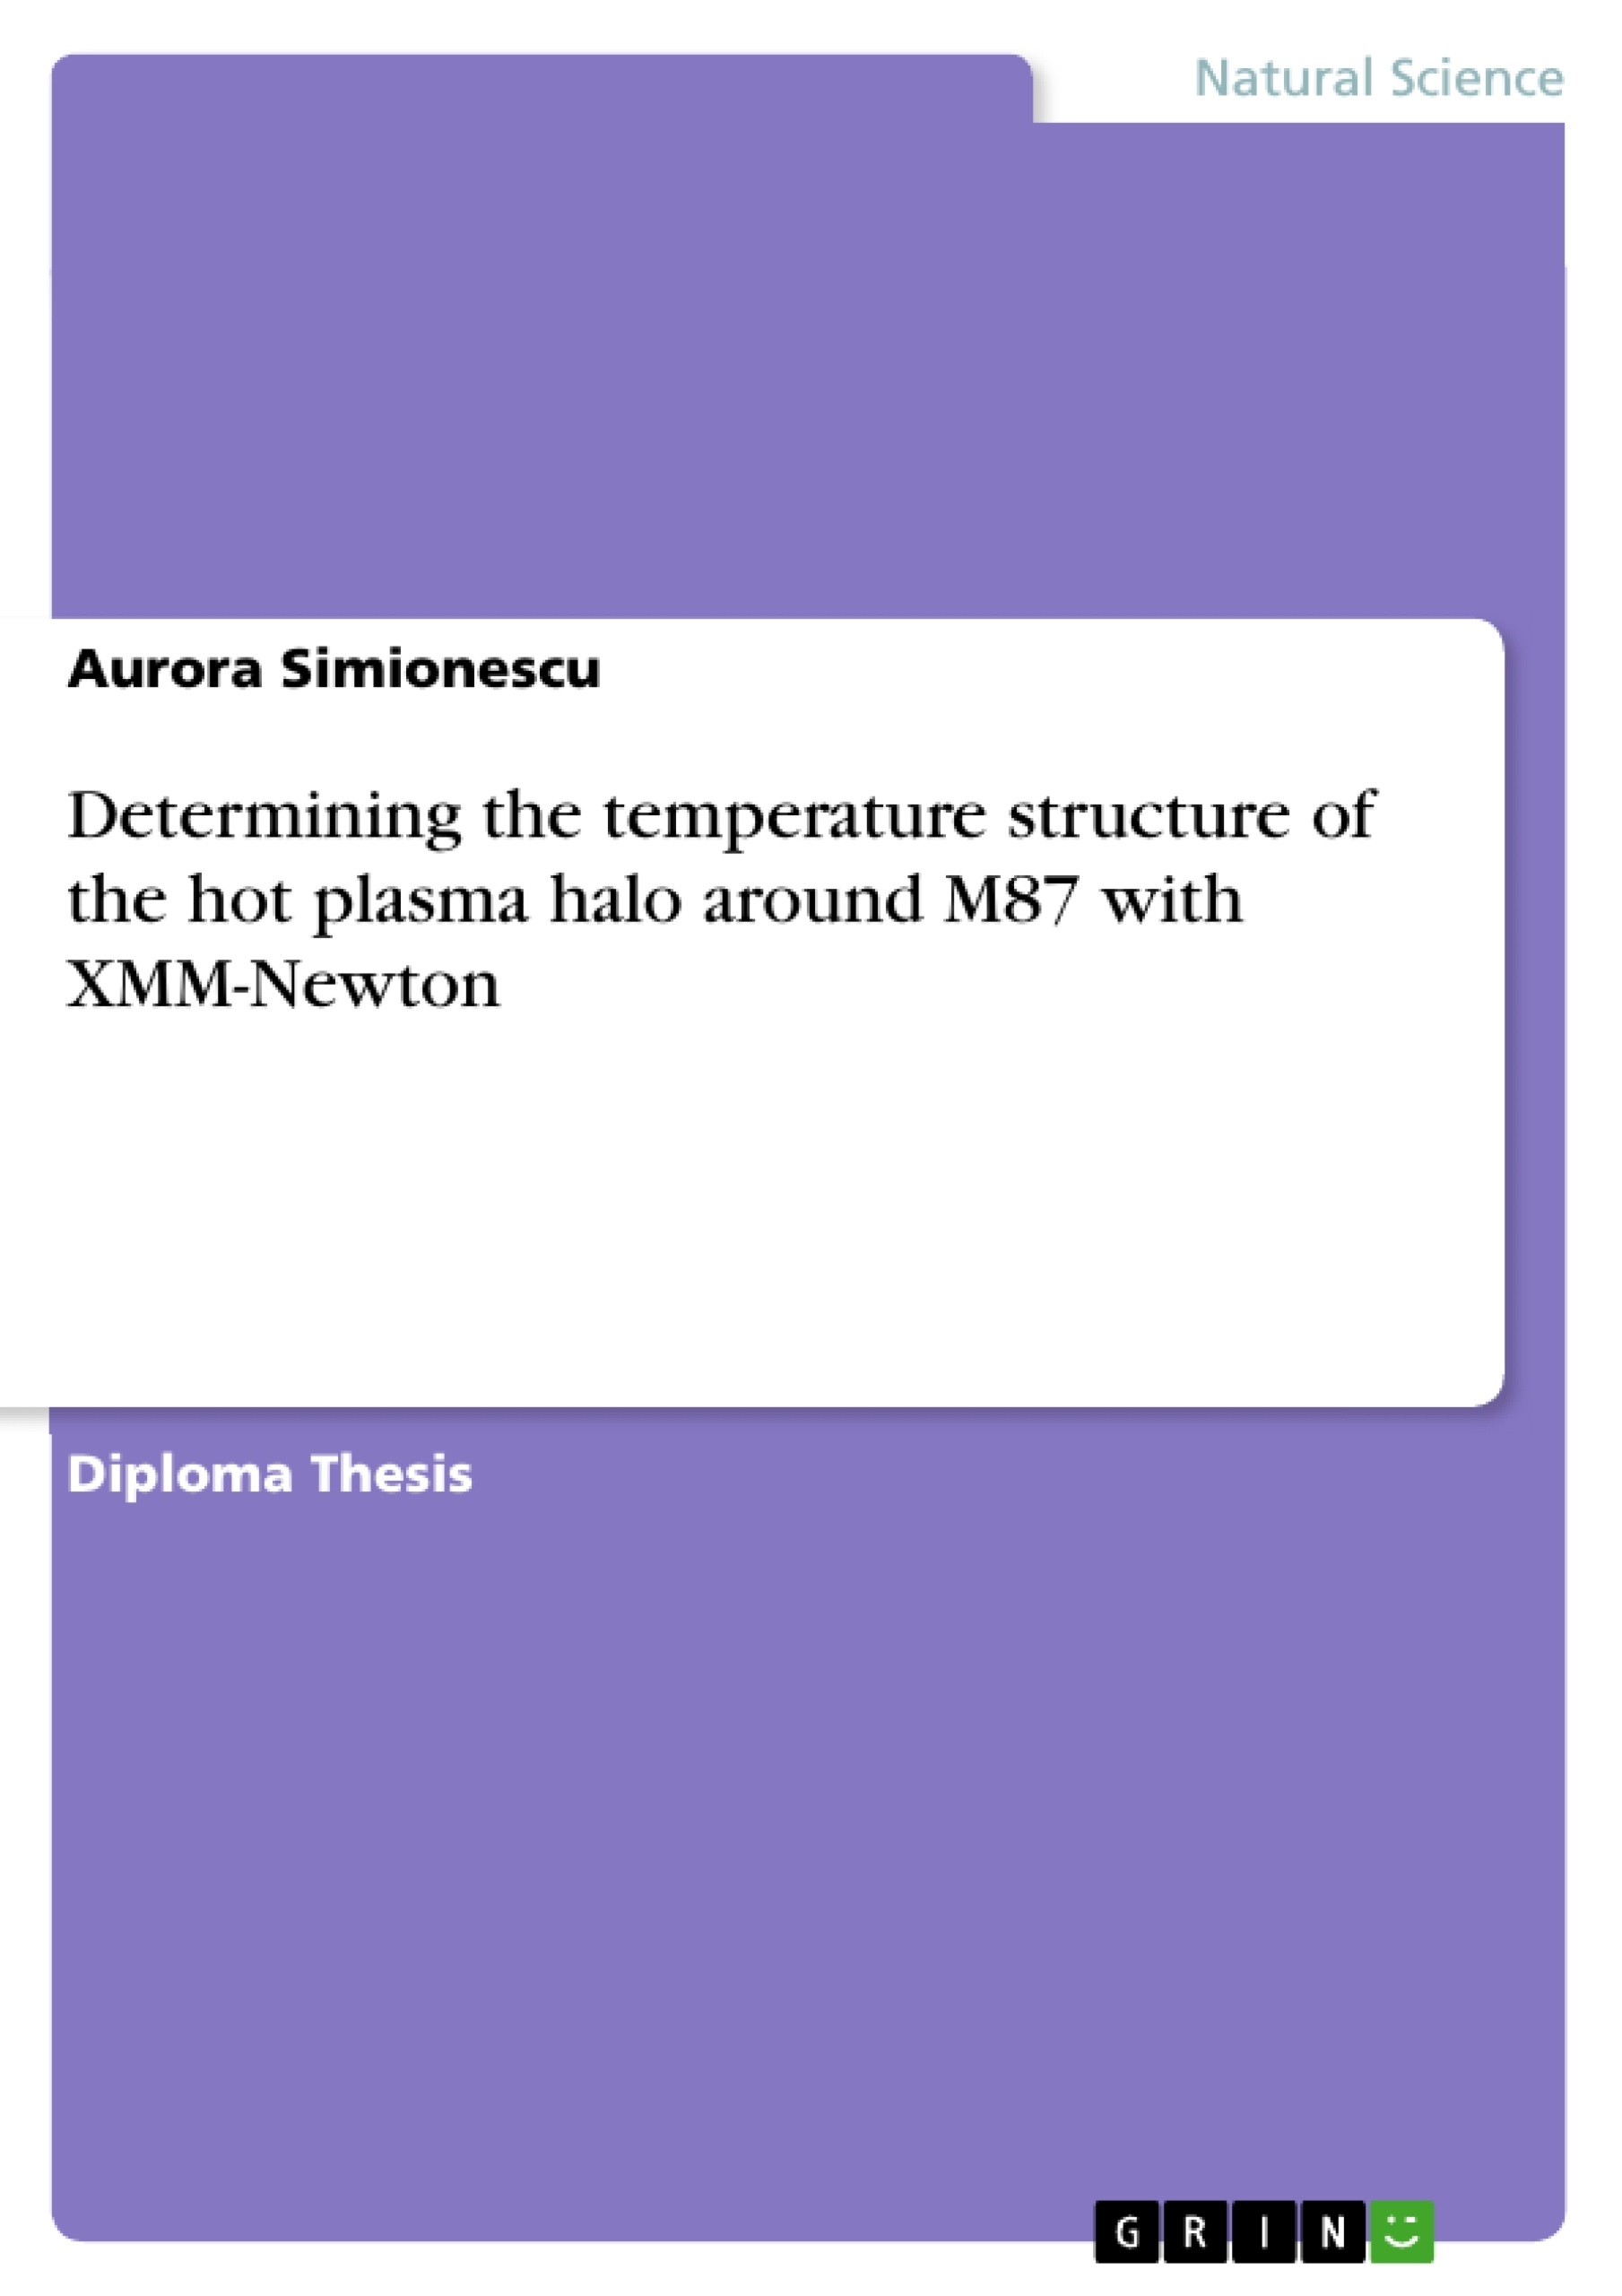 Titre: Determining the temperature structure of the hot plasma halo around M87 with XMM-Newton